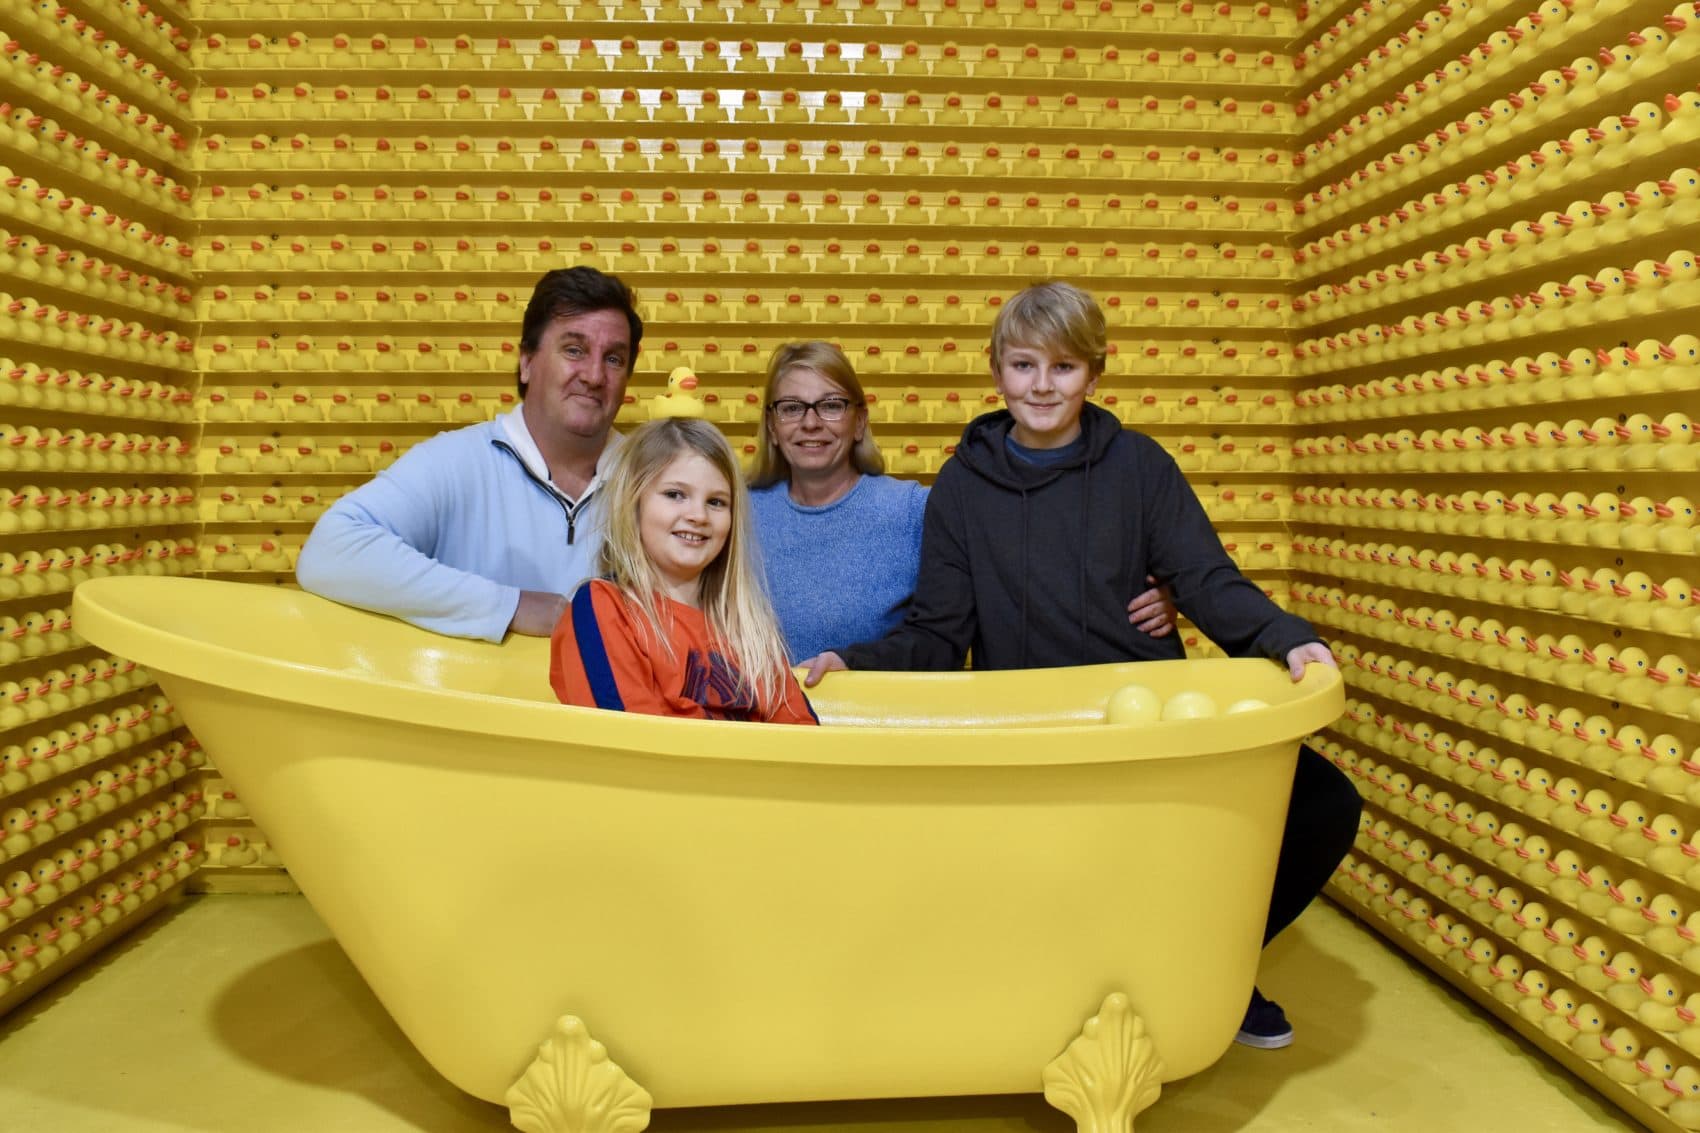 The O'Connor family poses in the bathtub room. From left, Bill, Anne, Kelly and Bill. (Meghan B. Kelly/WBUR)